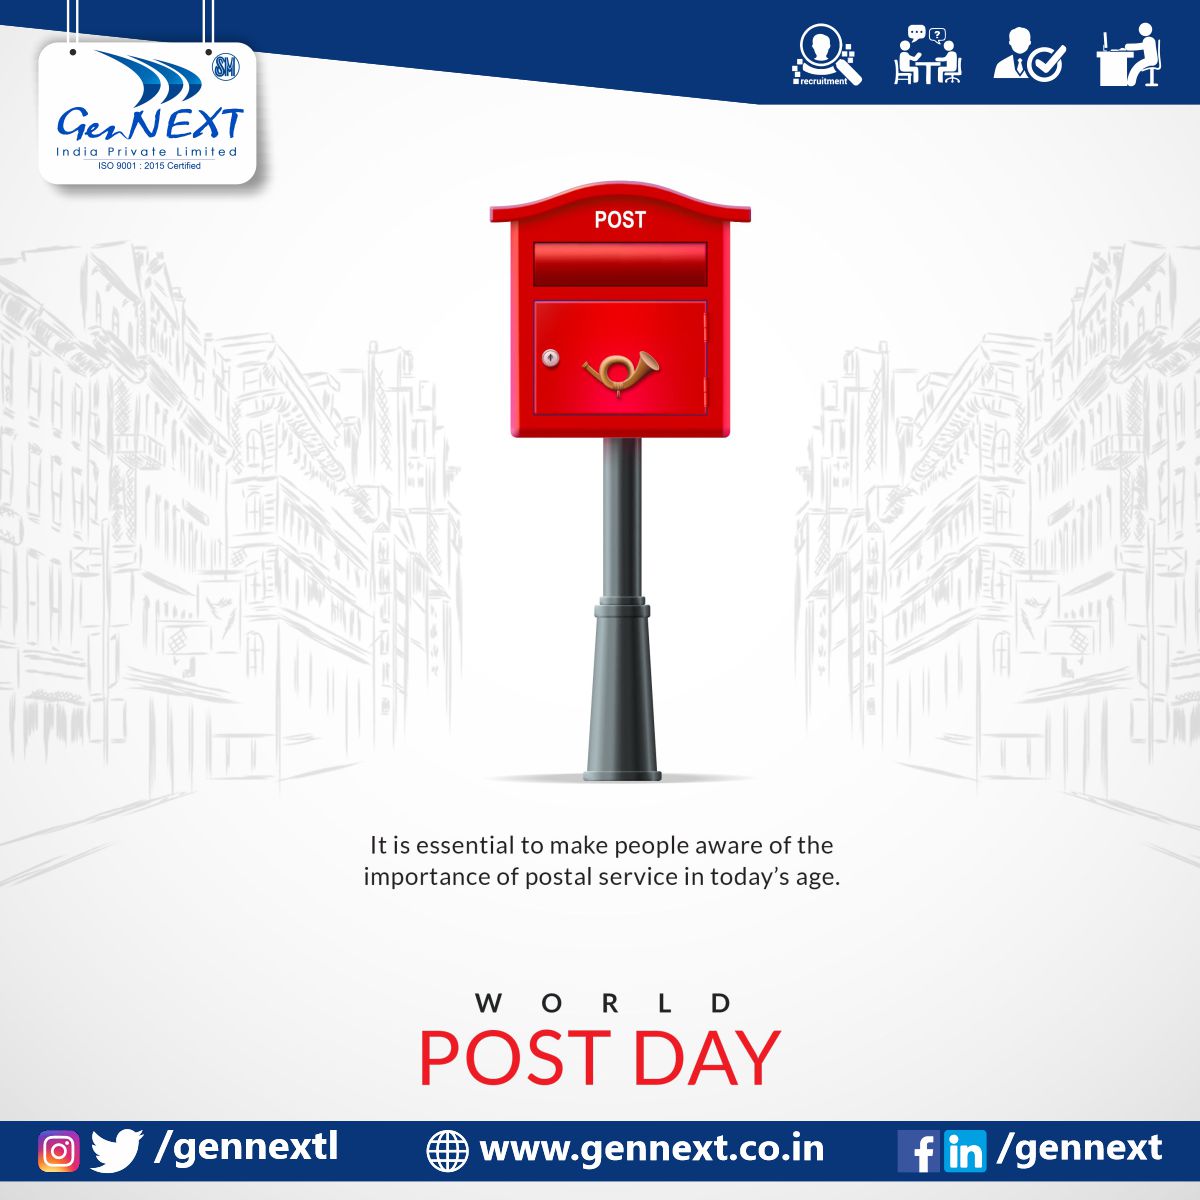 On the occasion of World Post Day, take a break from technology, write a letter, and share your feelings with your loved ones. Wish you a very happy World Post Day 2023.

#worldpostday #latter #post #gennext #gennextjob #gennextindia